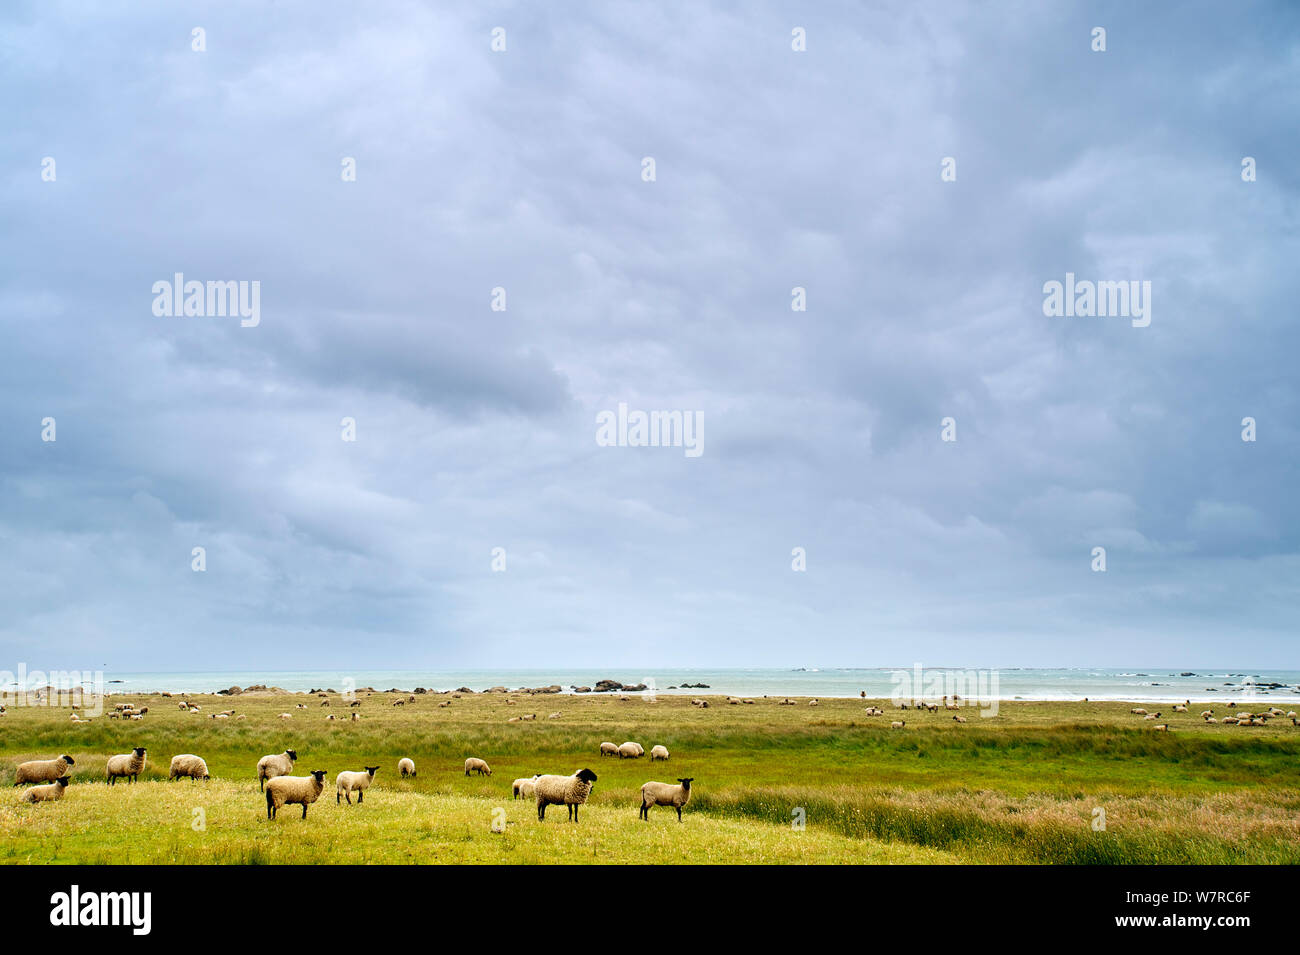 Grazing sheep with storm clouds approaching, Mocha Island, Chile, December 2012 Stock Photo